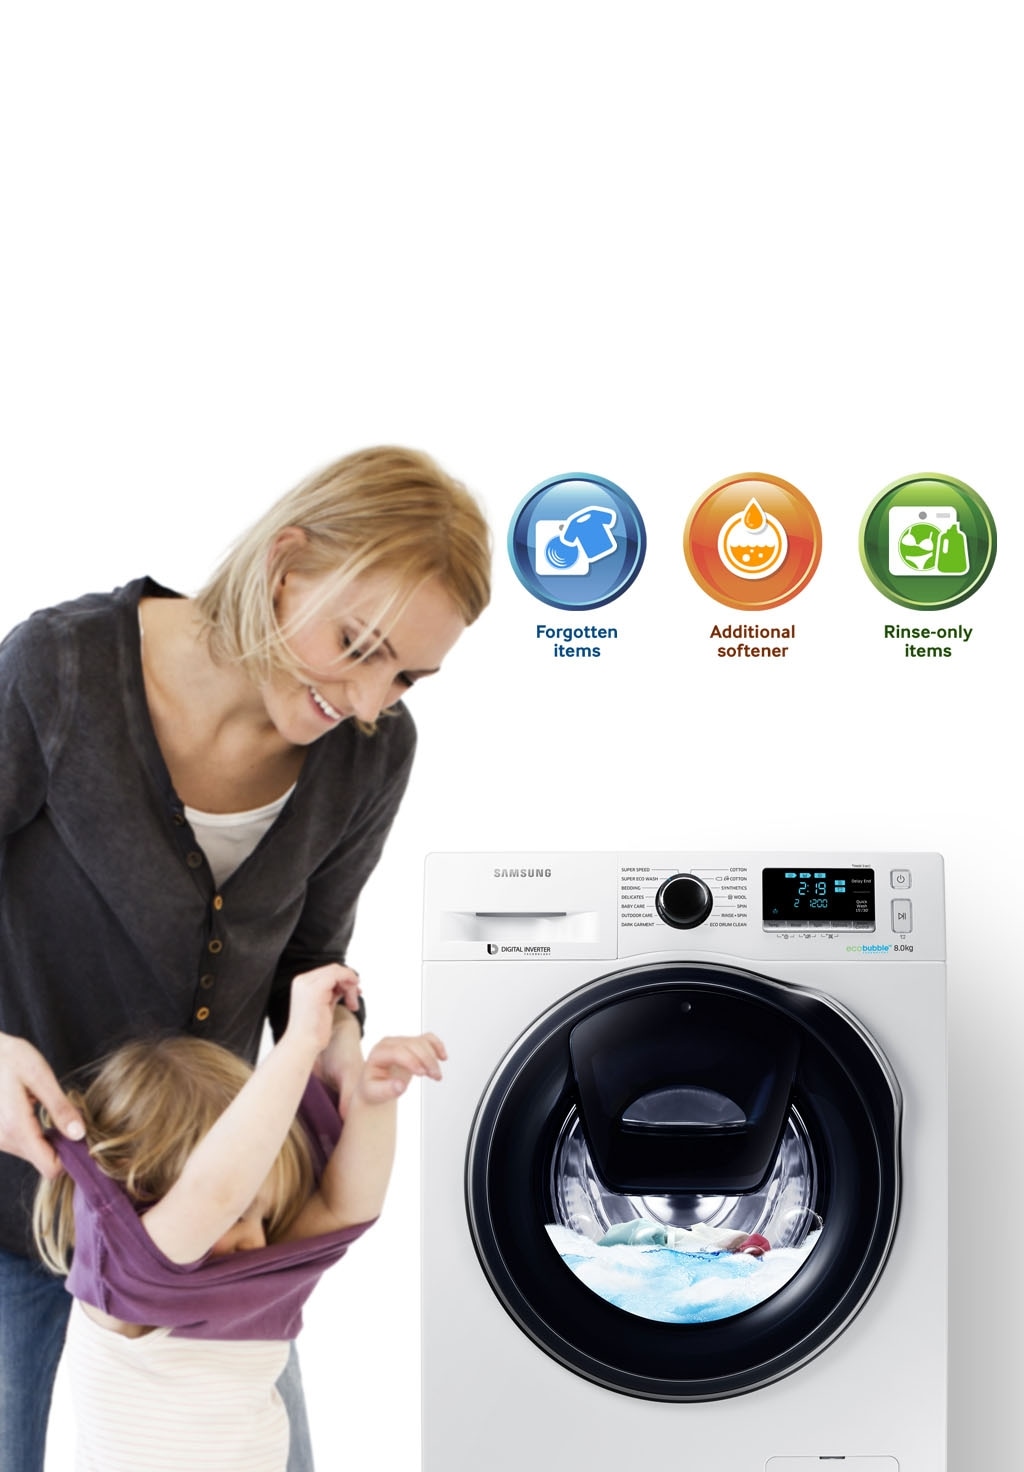 An image of a woman taking off her child's clothes next to a WW6500 washing machine which is in the middle of a cycle.